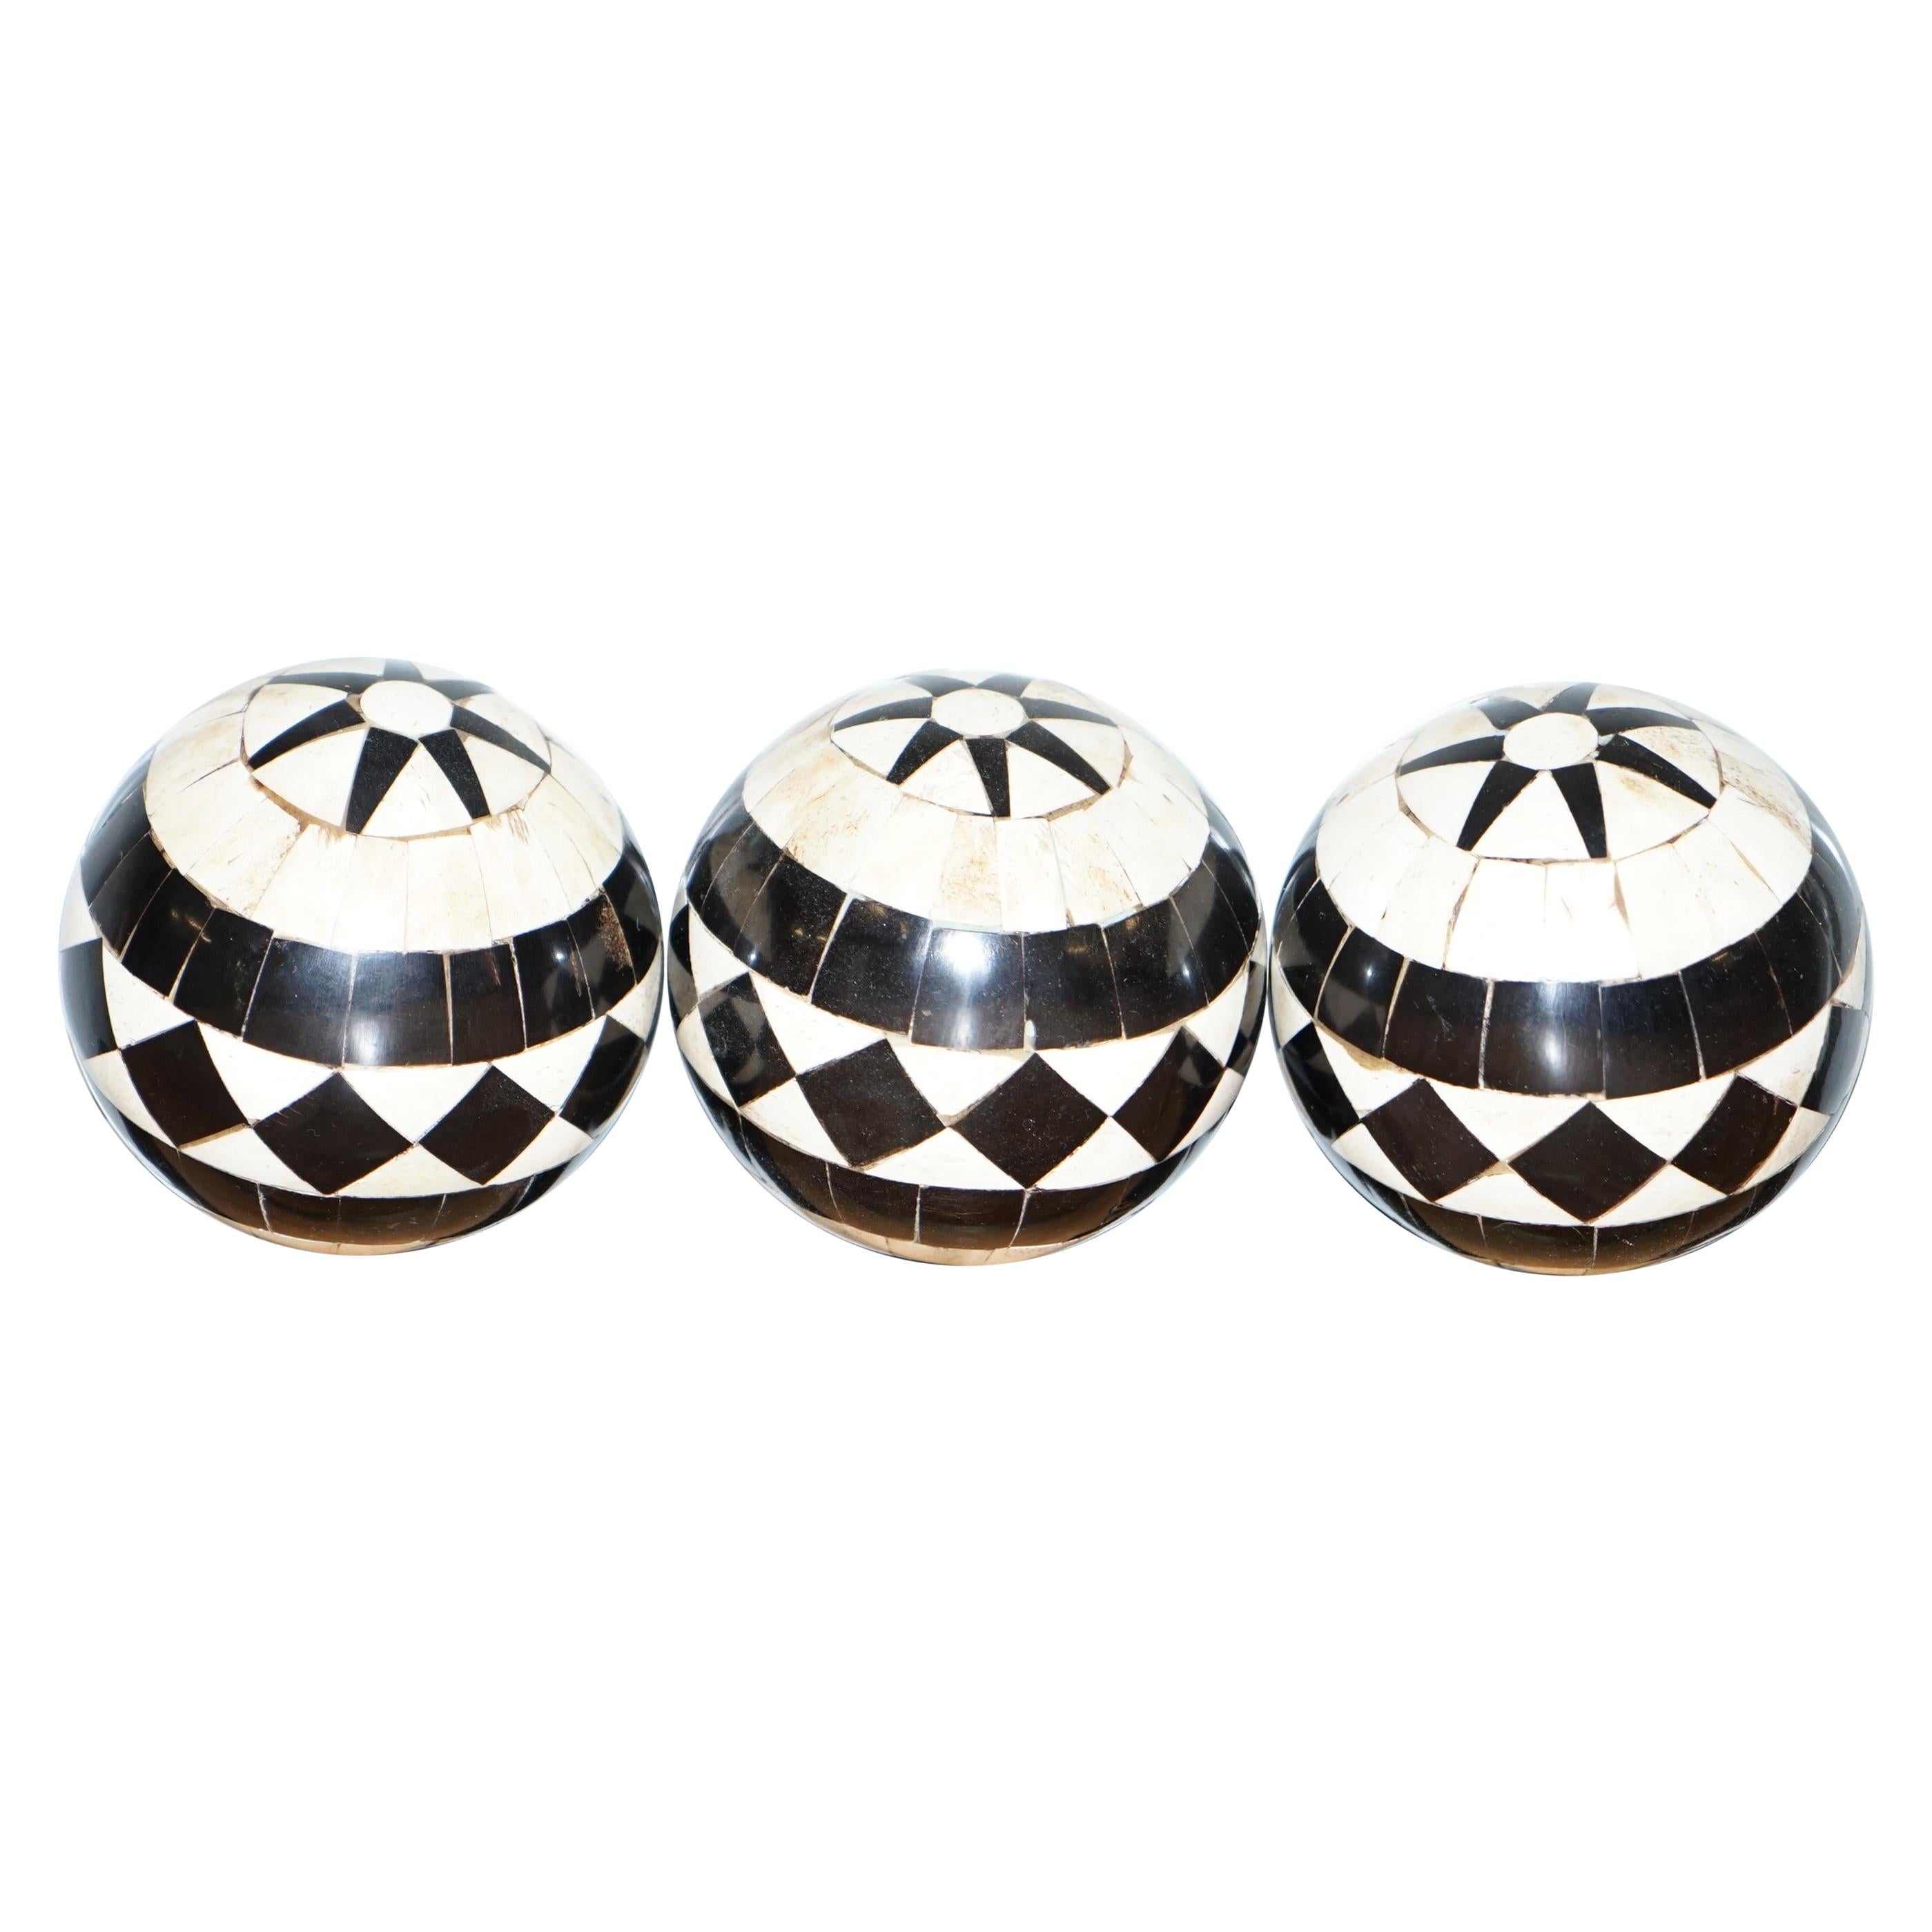 Set of Three Decorative Bone and Horn Inlaid Balls with Ebonized Contrast Color